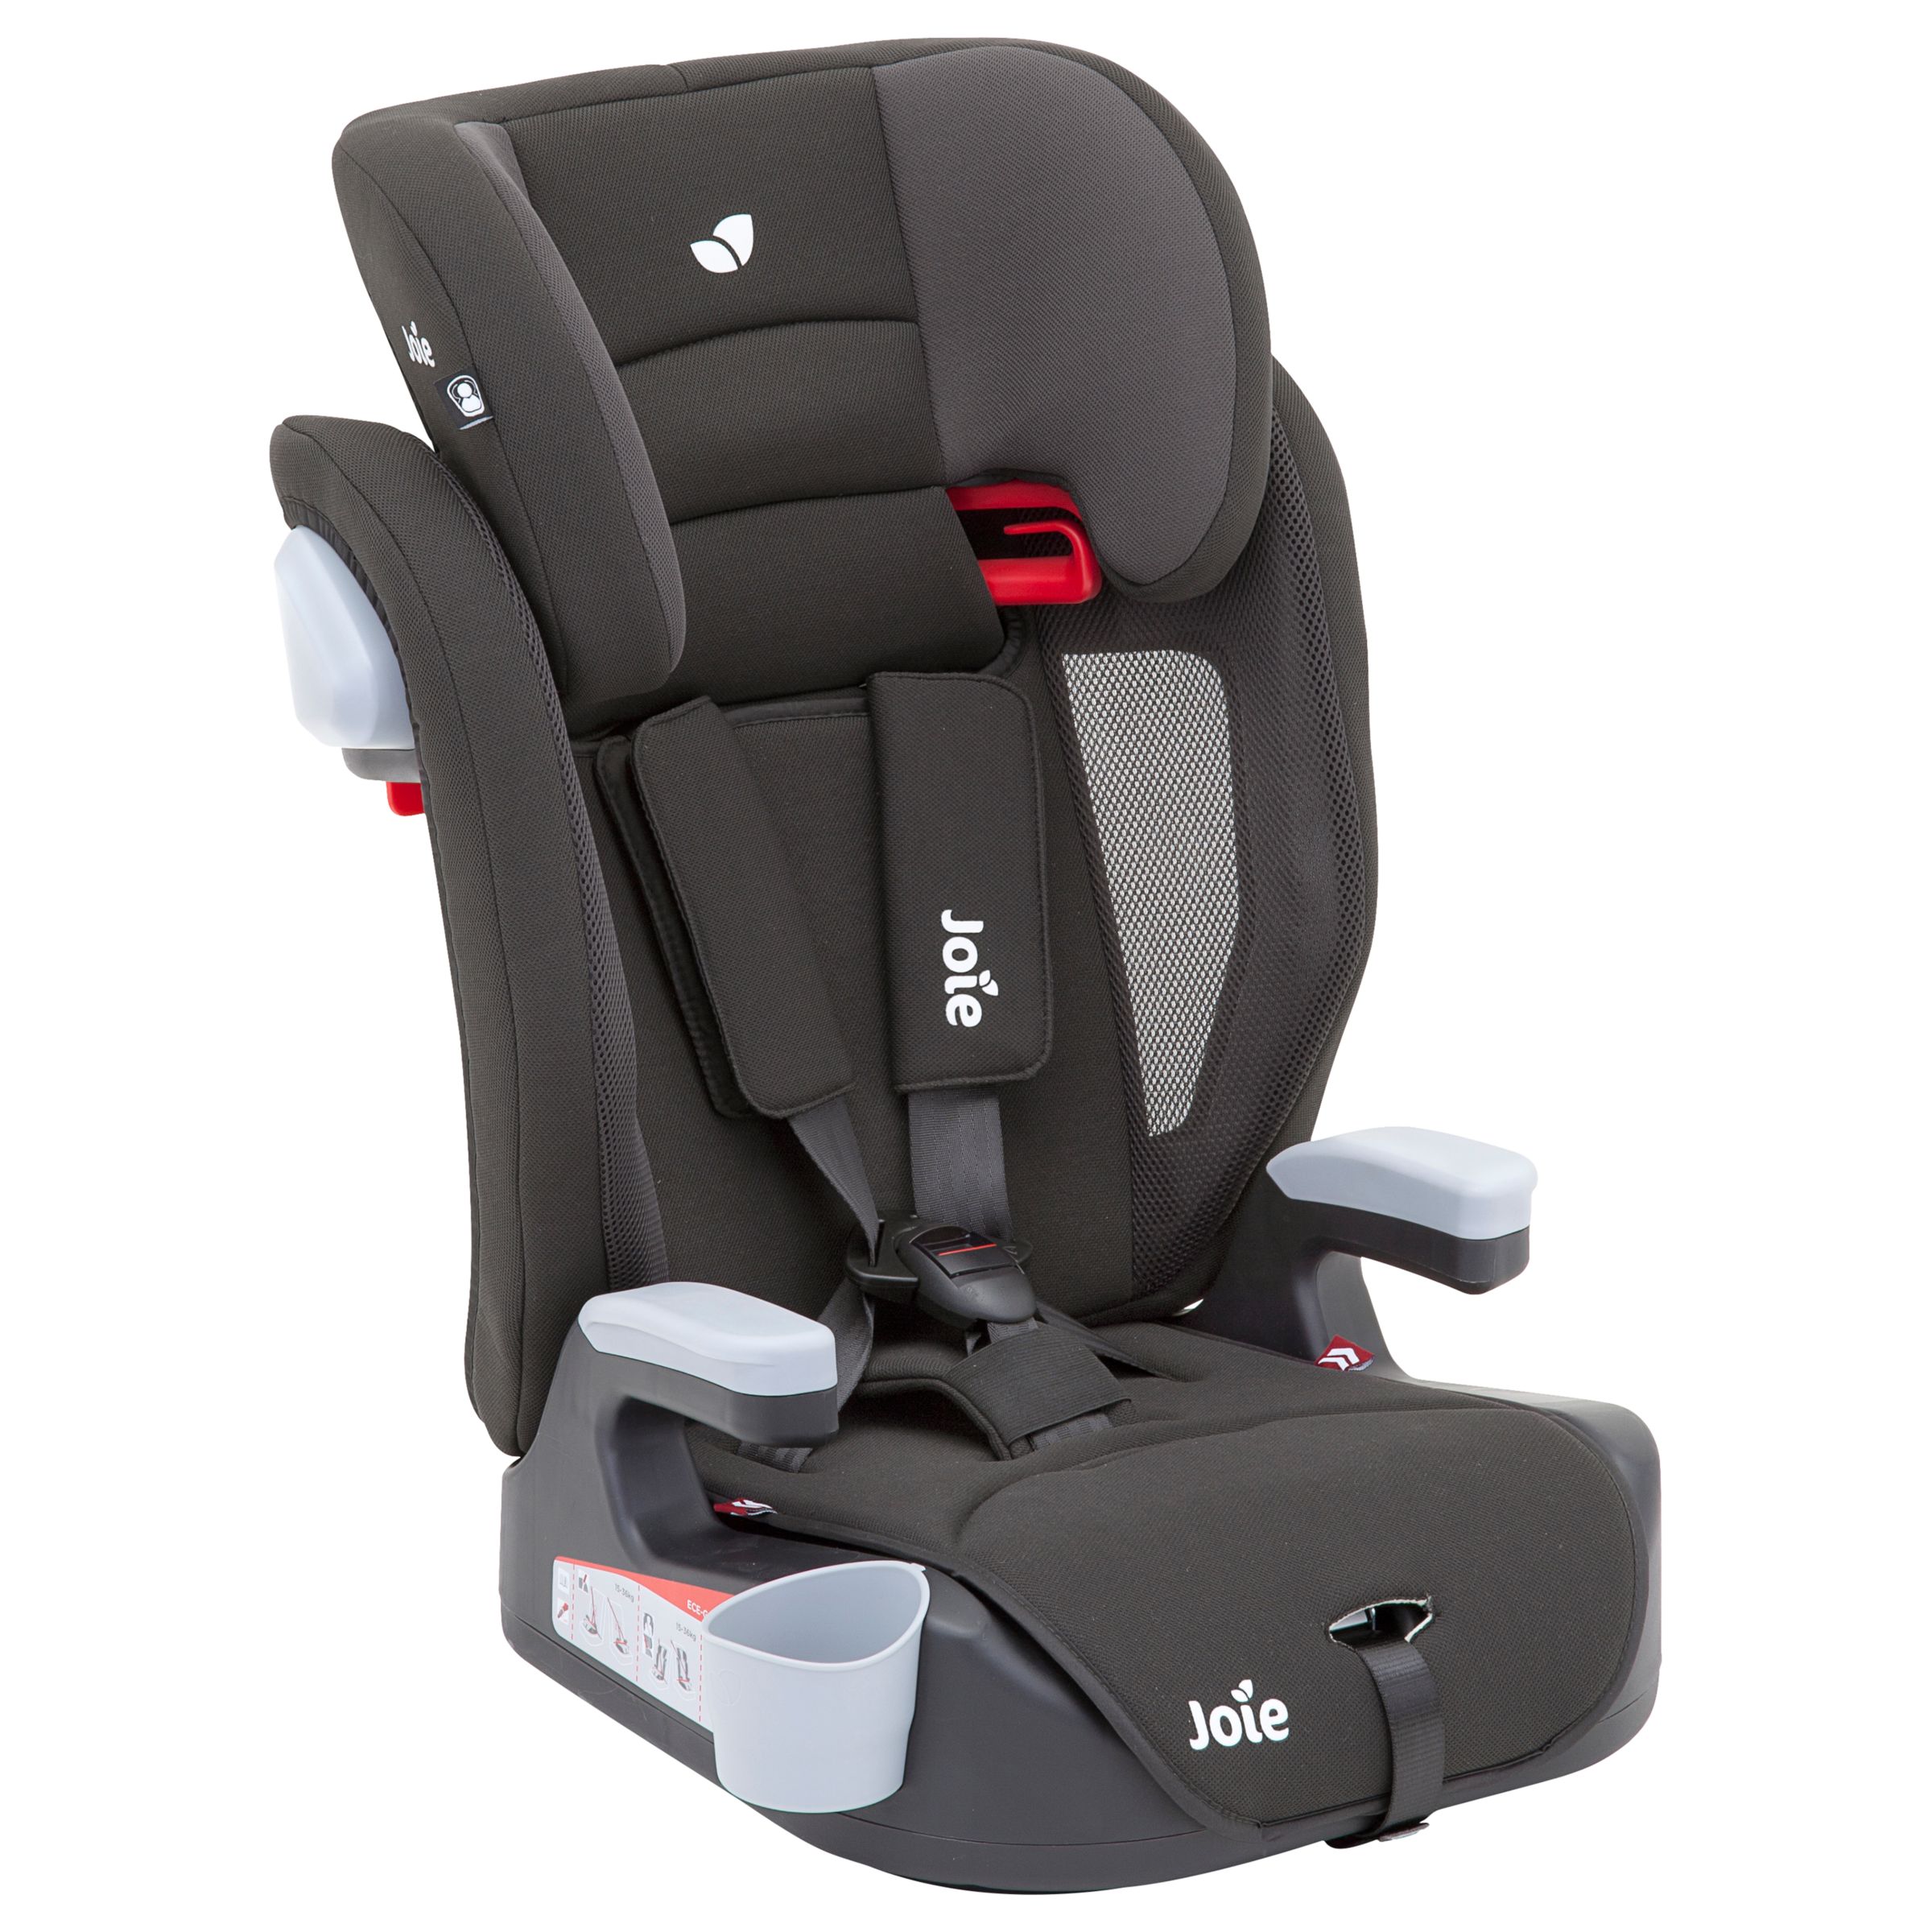 Joie Baby Elevate Group 1 2 3 Car Seat, What Is A Group 1 Car Seat